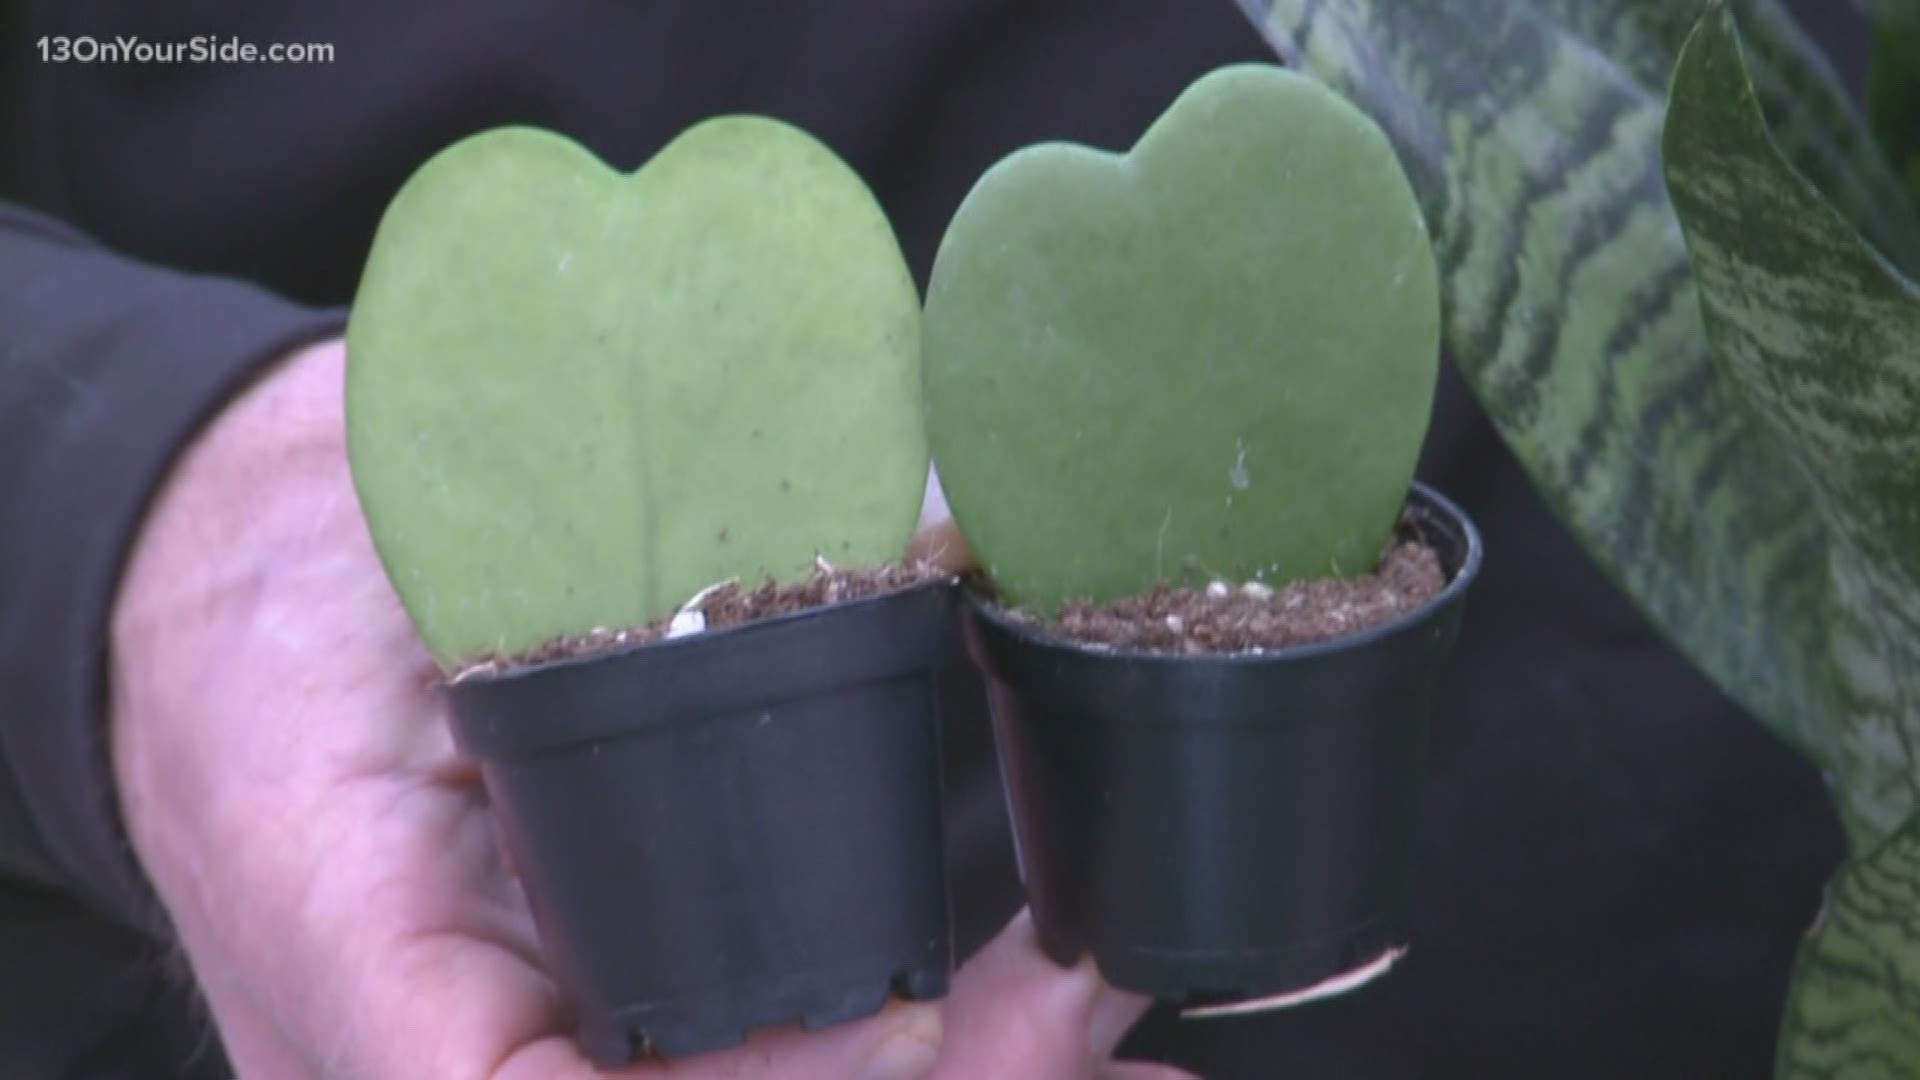 Our greenthumb expert Rick Vuyst shows us some plants that are easy to care for during the cold winter months.